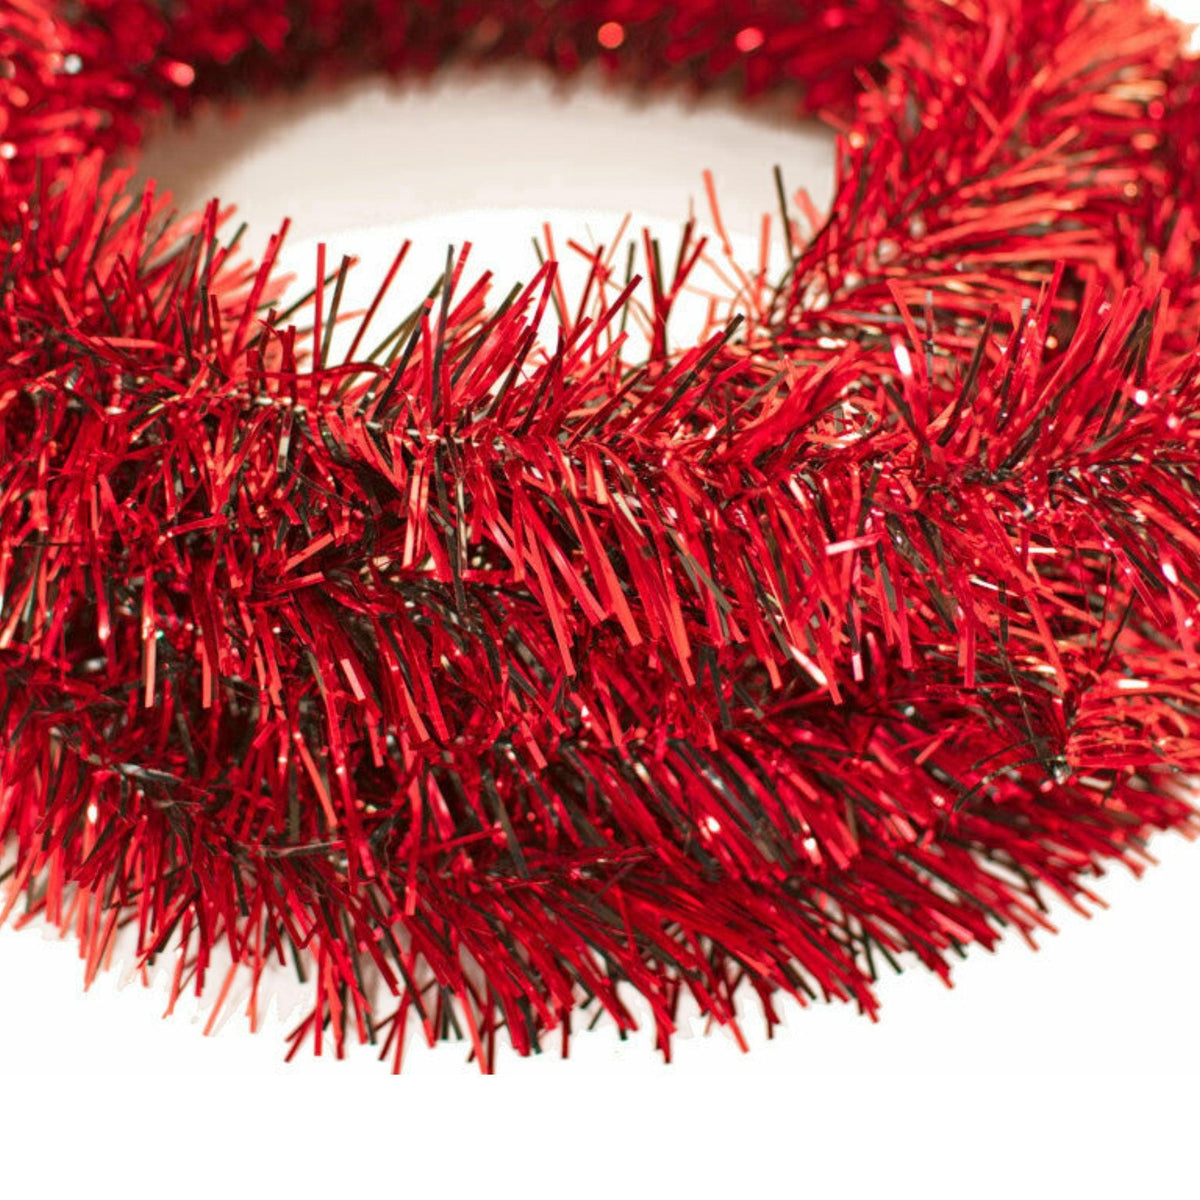 Lee Display's brand new 25ft Shiny Red and Black Tinsel Garlands and Fringe Embellishments on sale at leedisplay.com